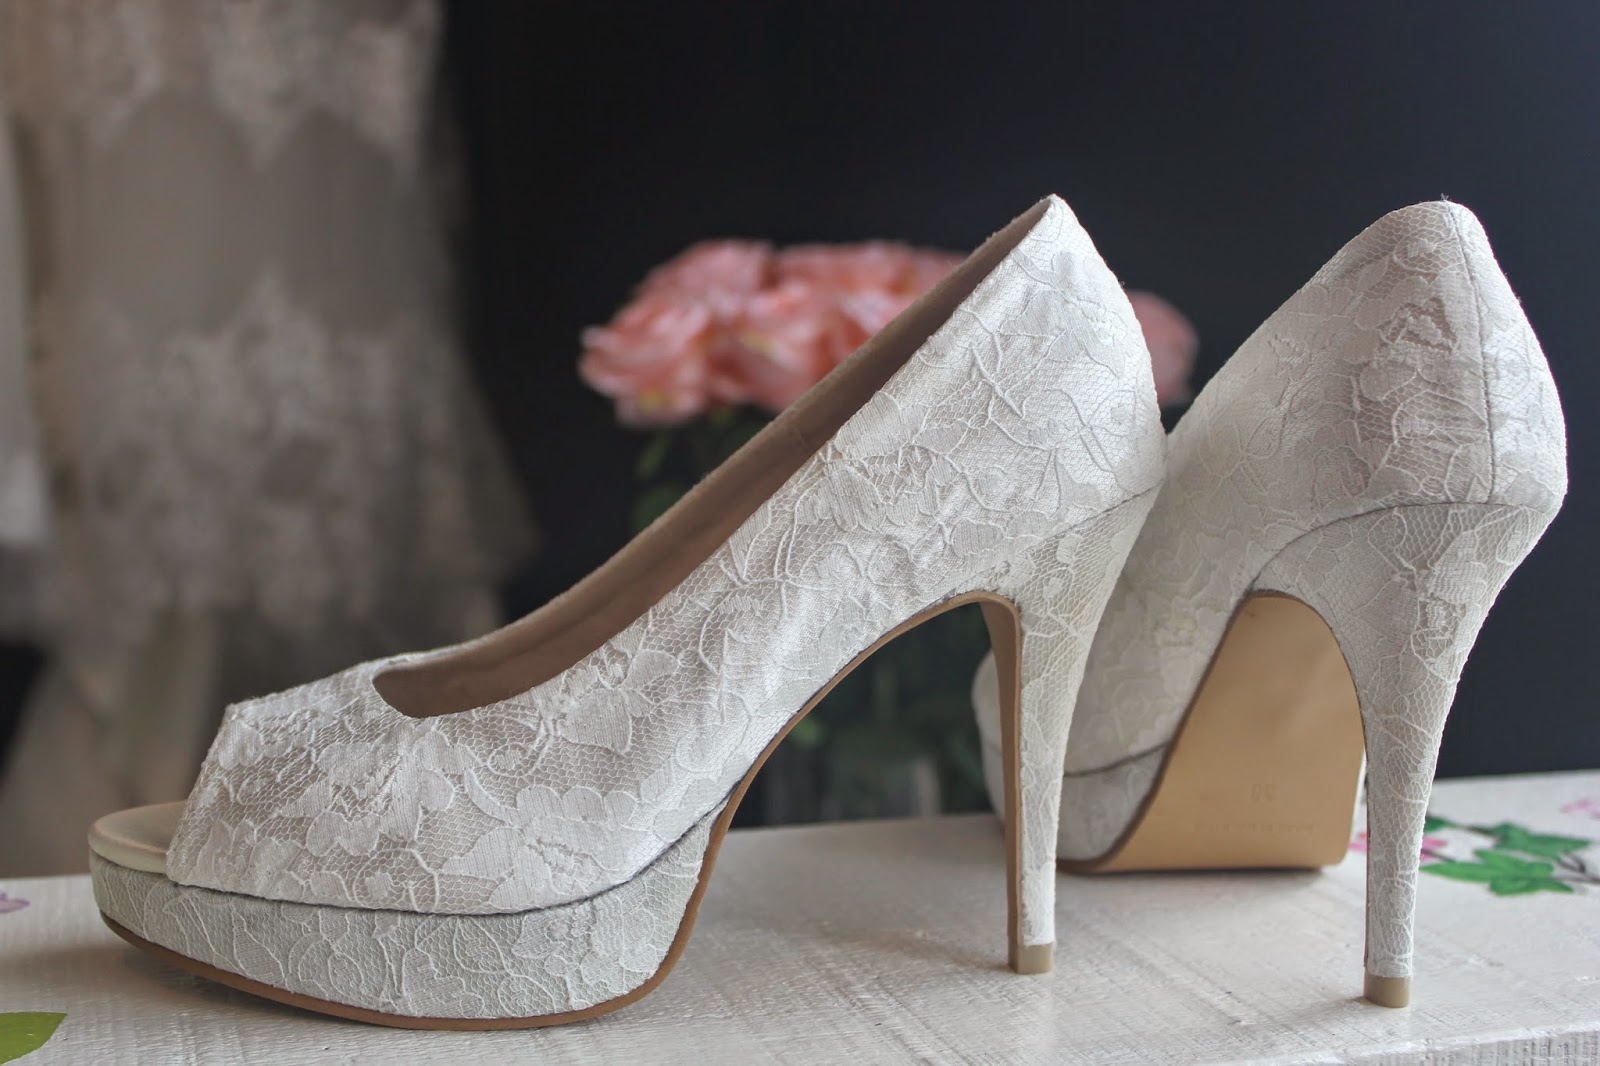 MY BRIDAL GOWN: 4 Inches Off-White Lace Bridal Shoes